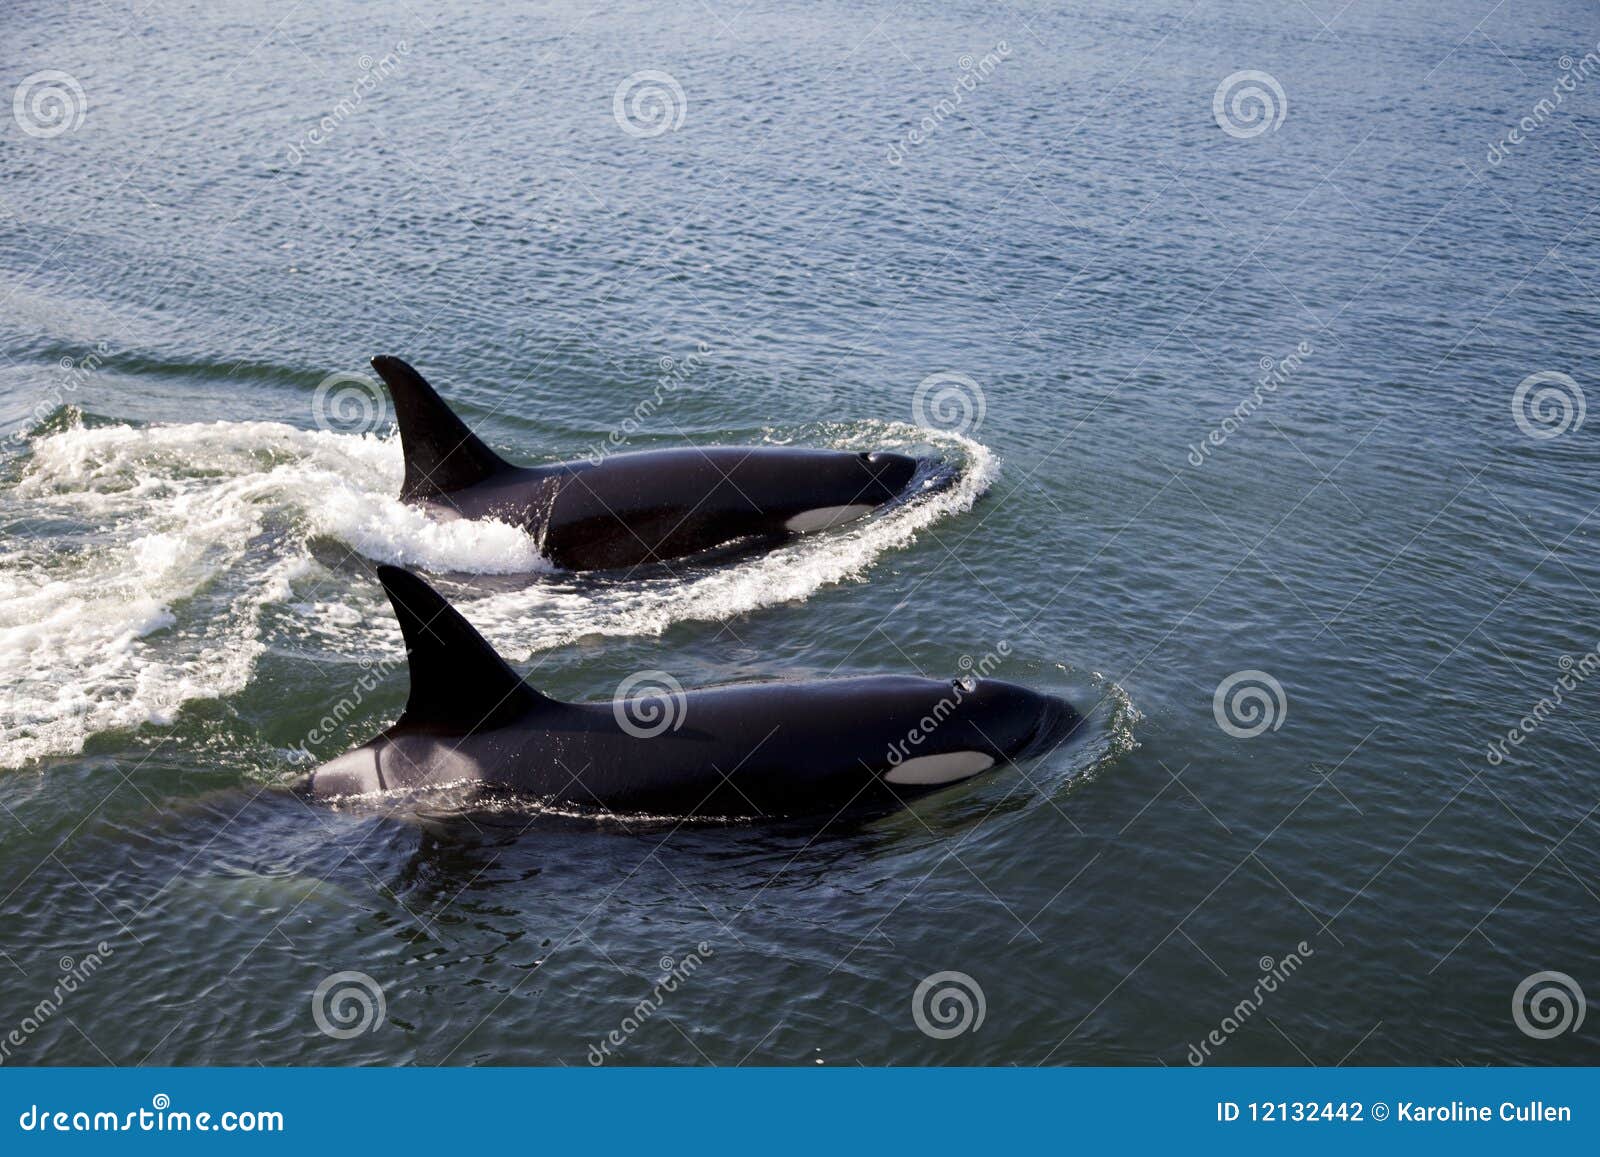 two orcas swimming